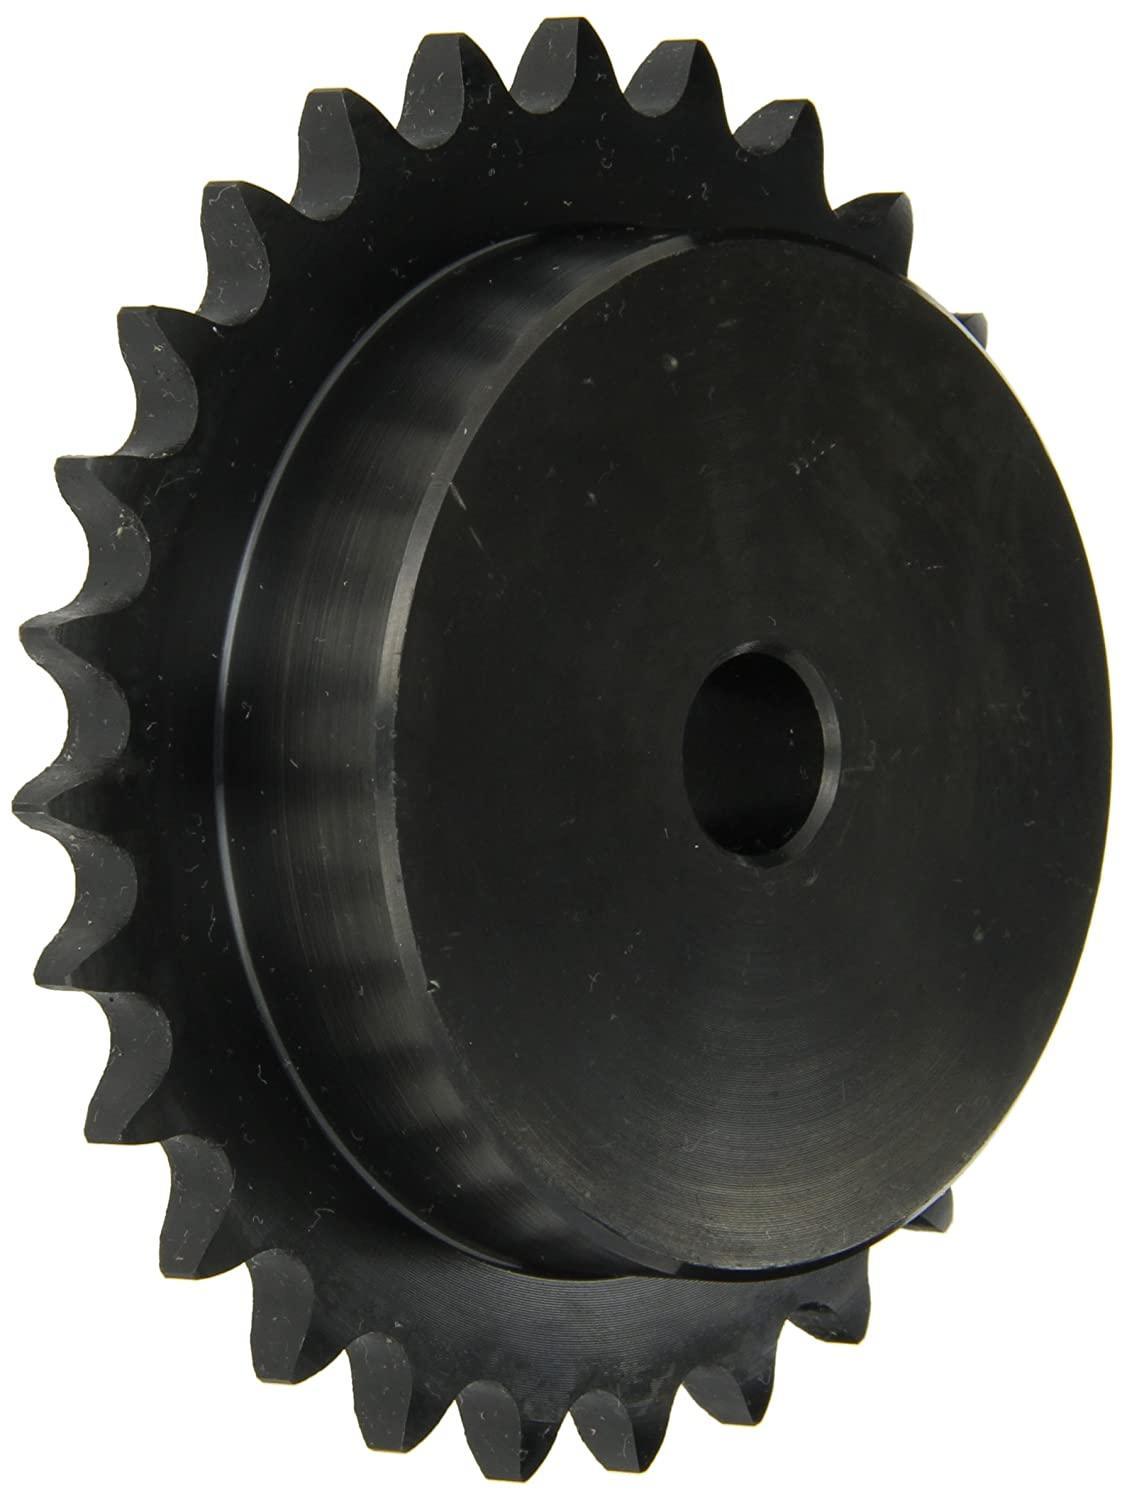 100B40 Roller Chain Sprocket With Stock Bore - Forces Inc